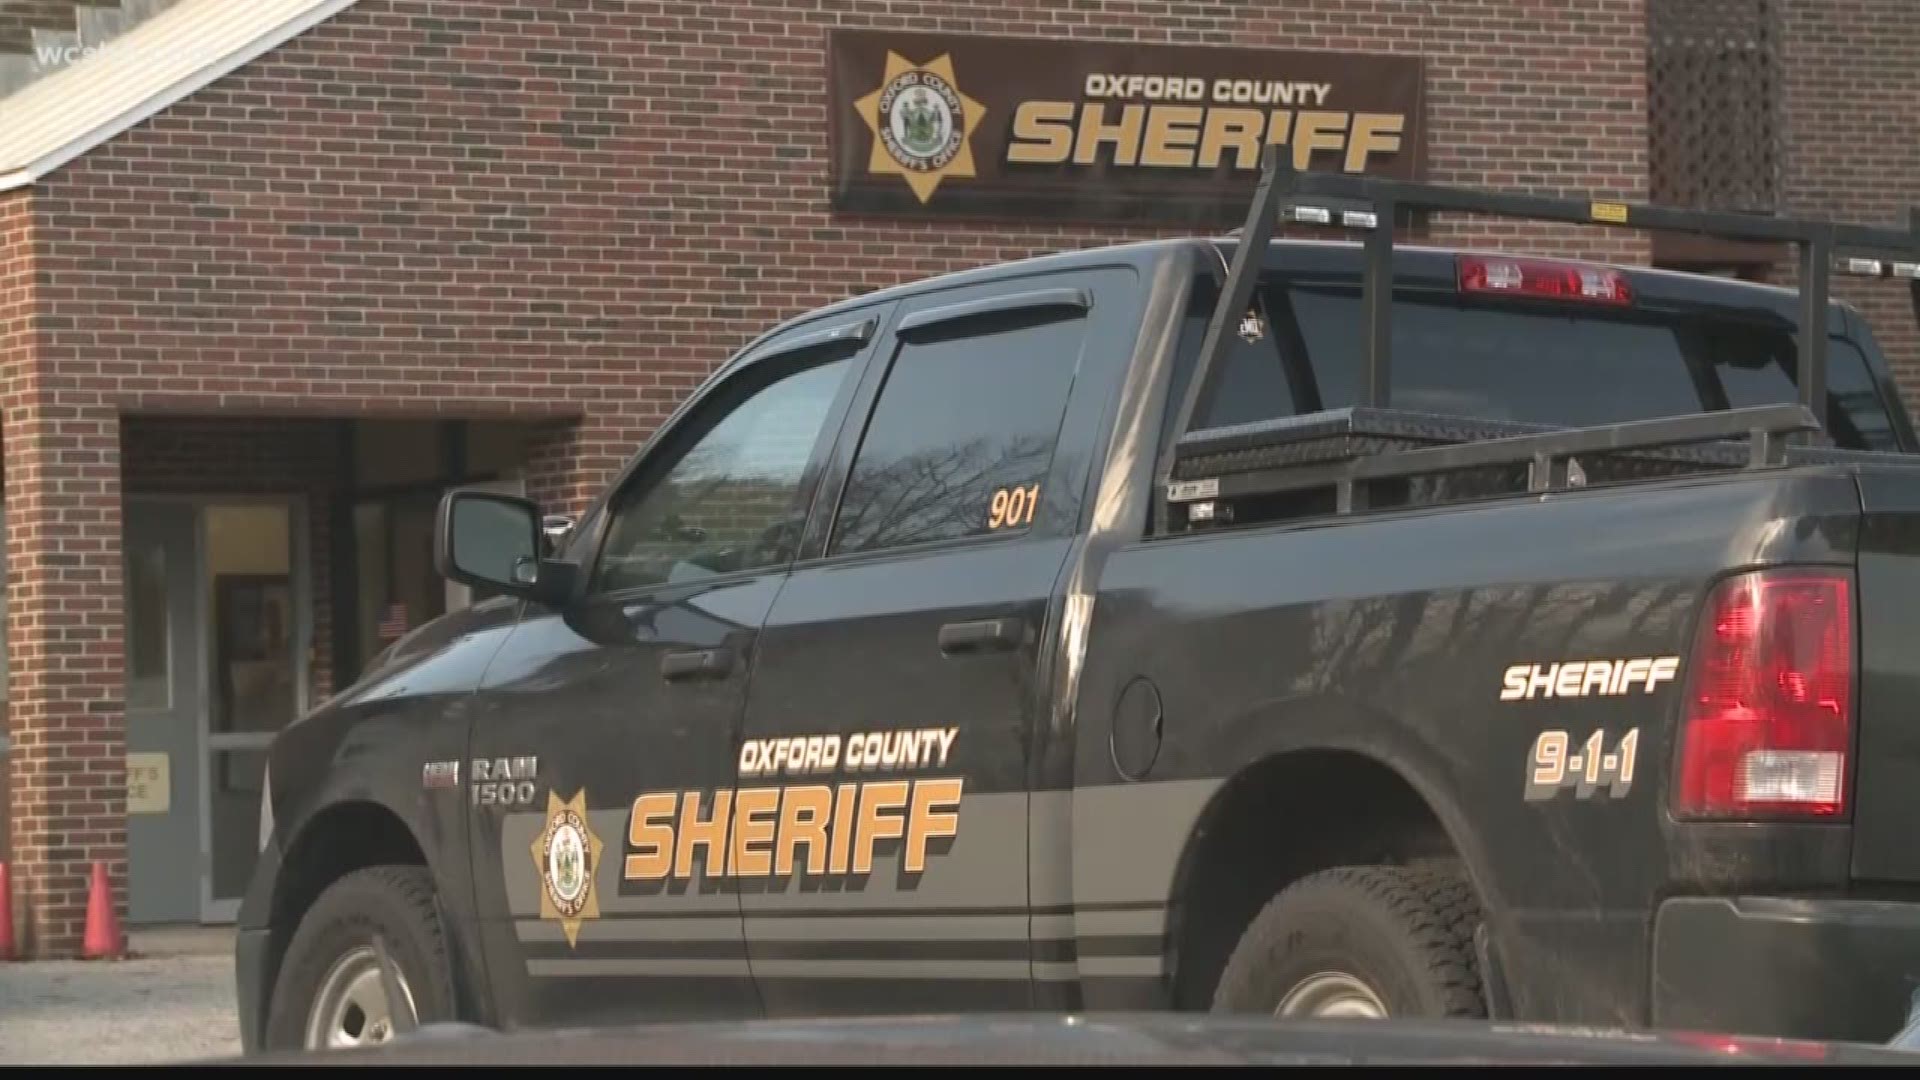 NOW: What's next for Oxford County Sheriff's Office?